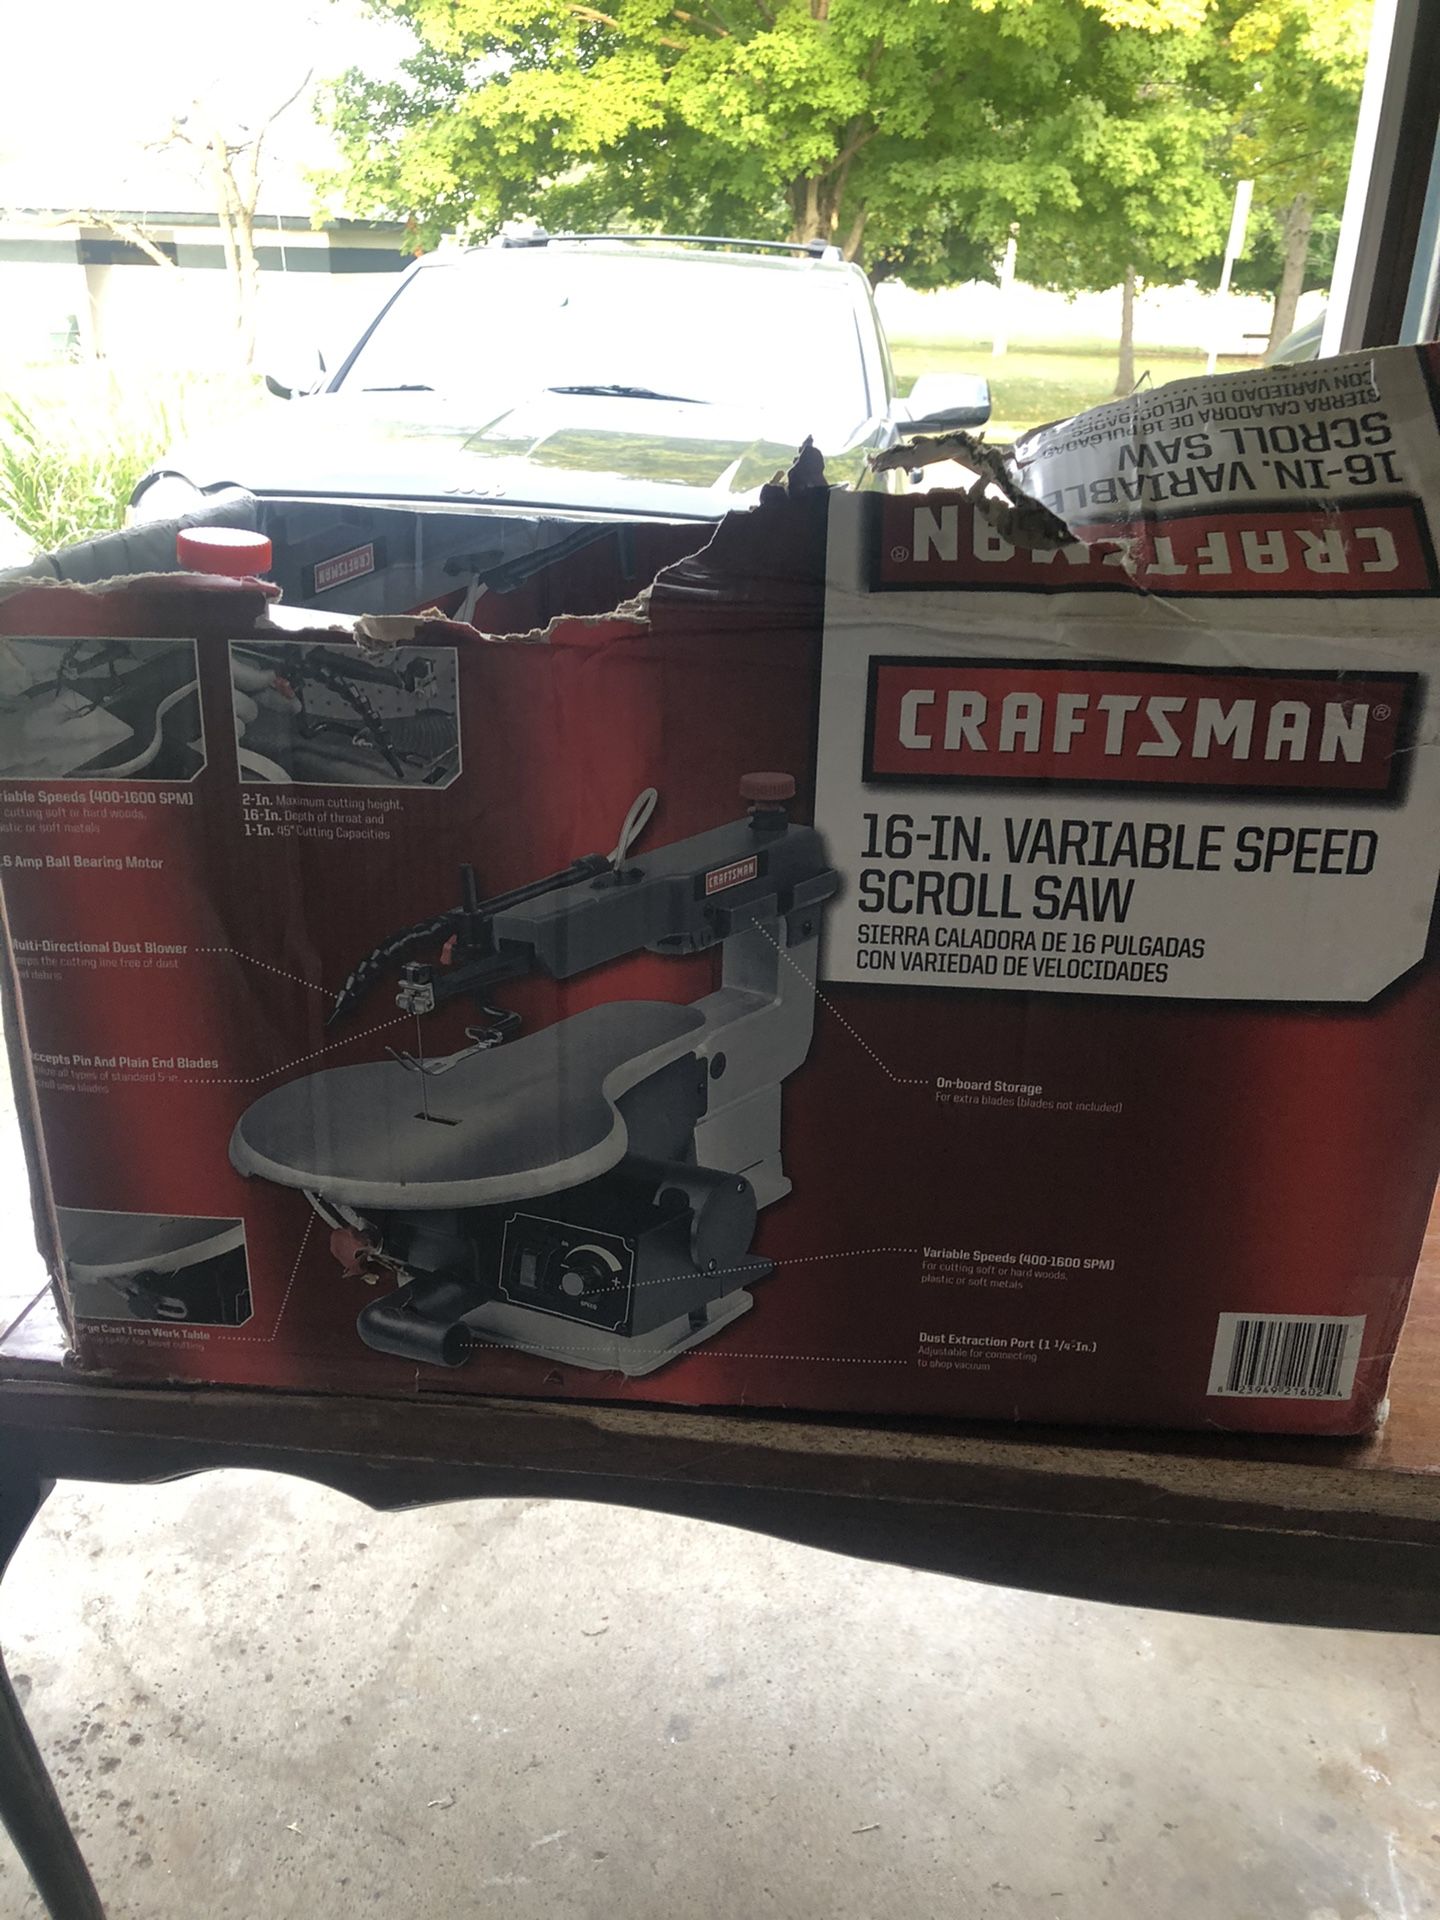 Scroll saw brand new never use still in box $160 obo